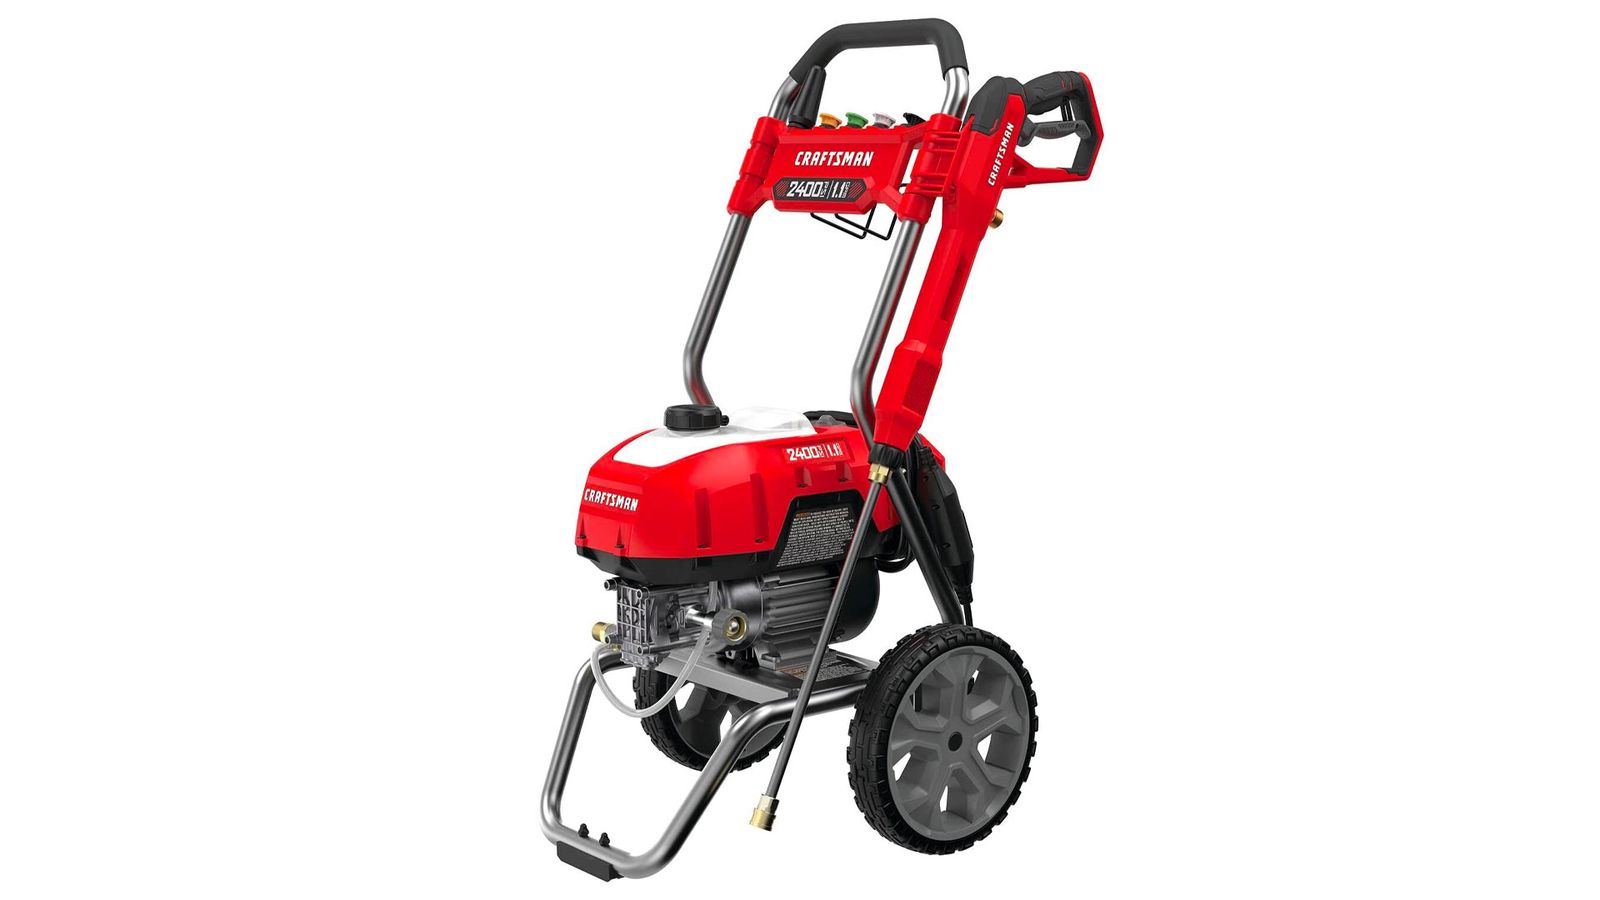 Craftsman CMEPW2400 product image of a black and red machine with wheels.